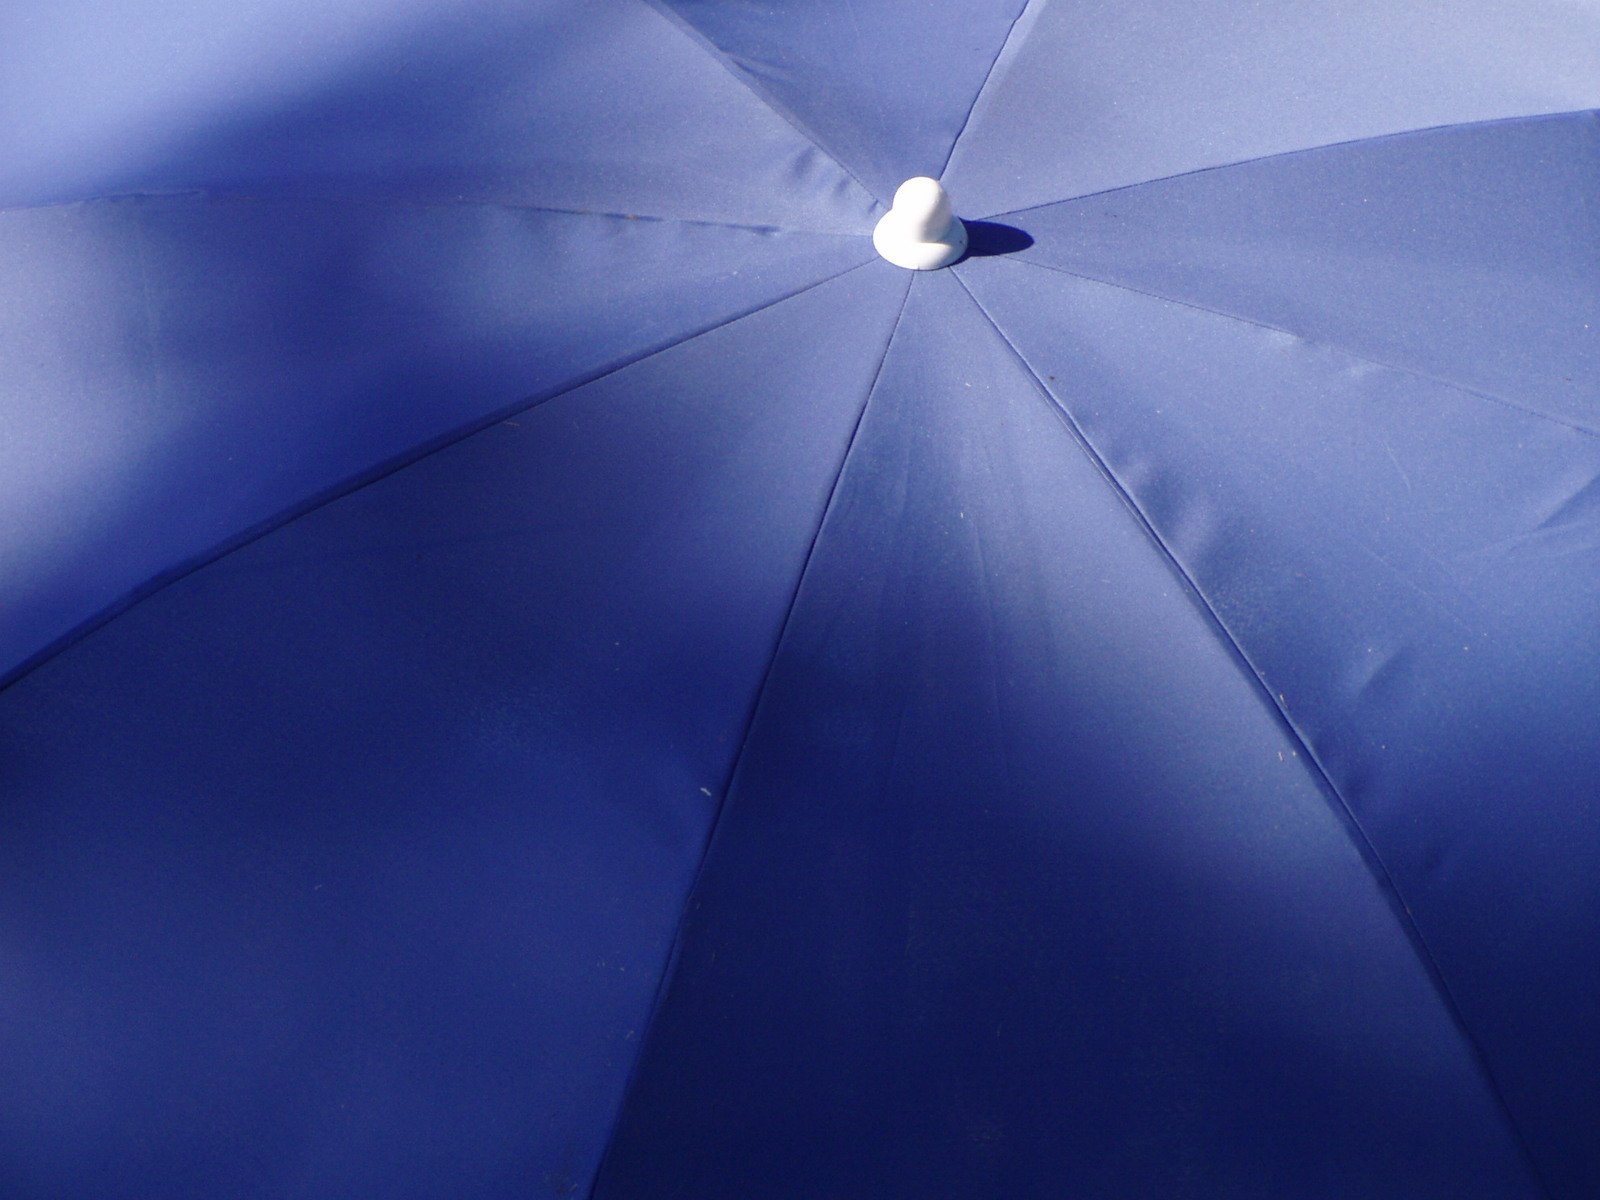 the underside of a blue umbrella with a light on it